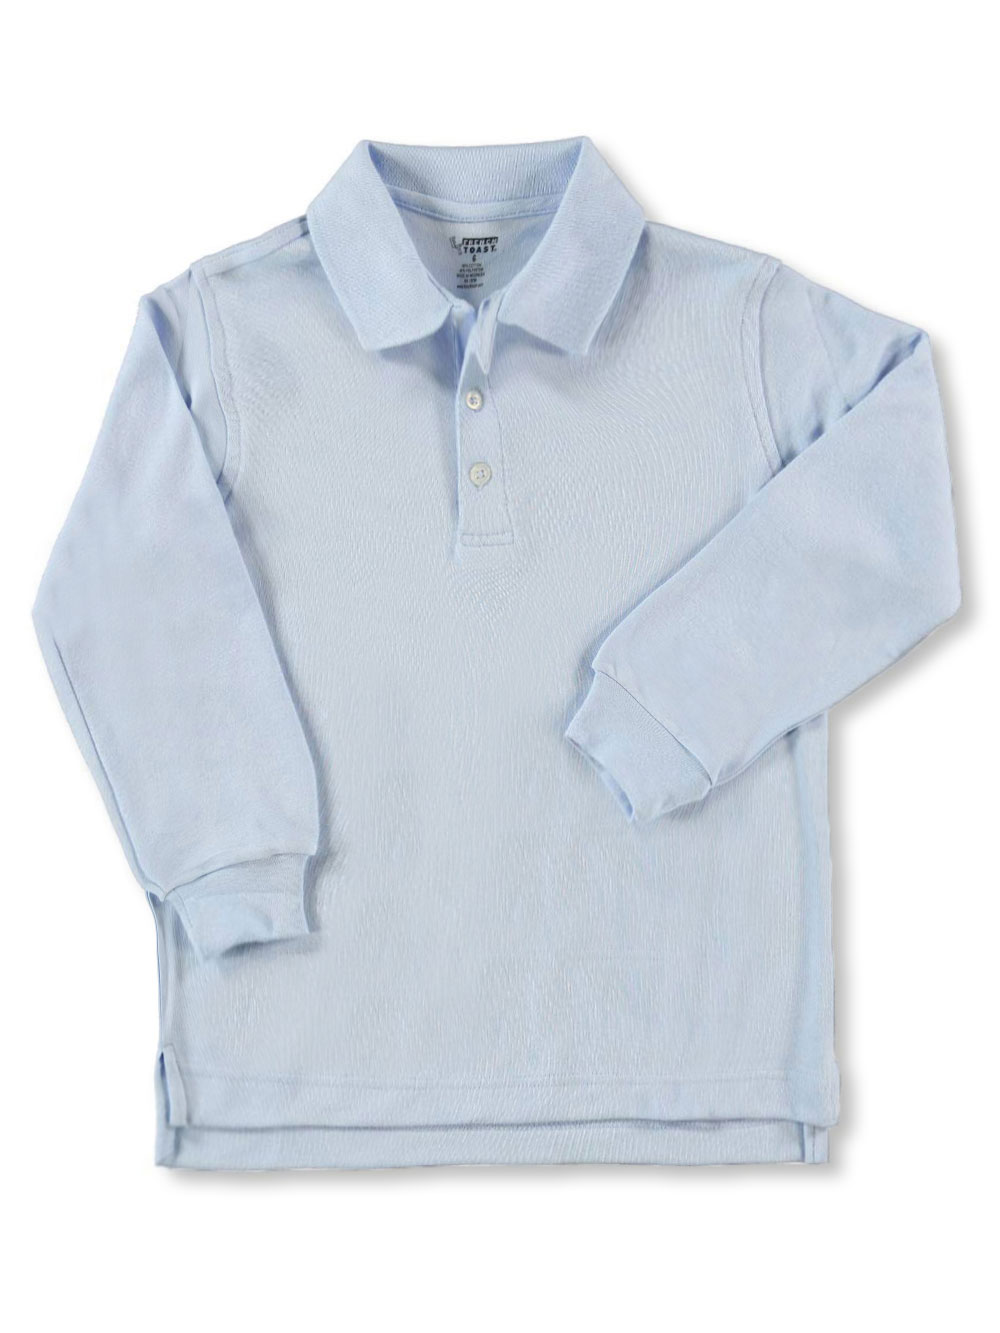 Size 5 Knit Polos for Boys